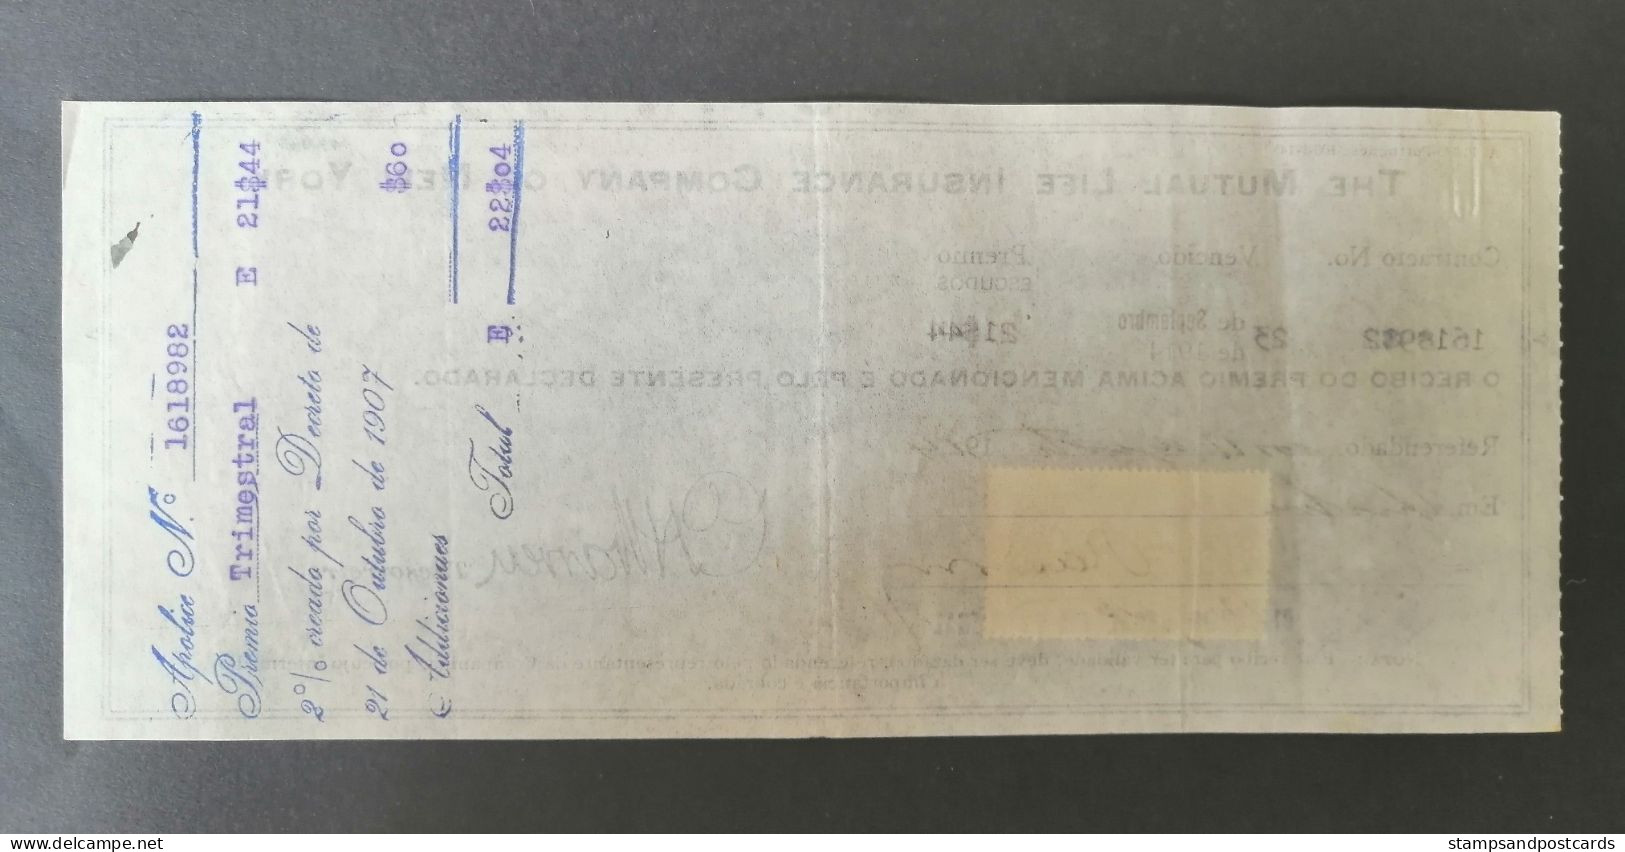 Portugal Facture Assurance Timbre Fiscal 1914 Mutual Life Insurance Co. New York Receipt Revenue Stamp - Covers & Documents